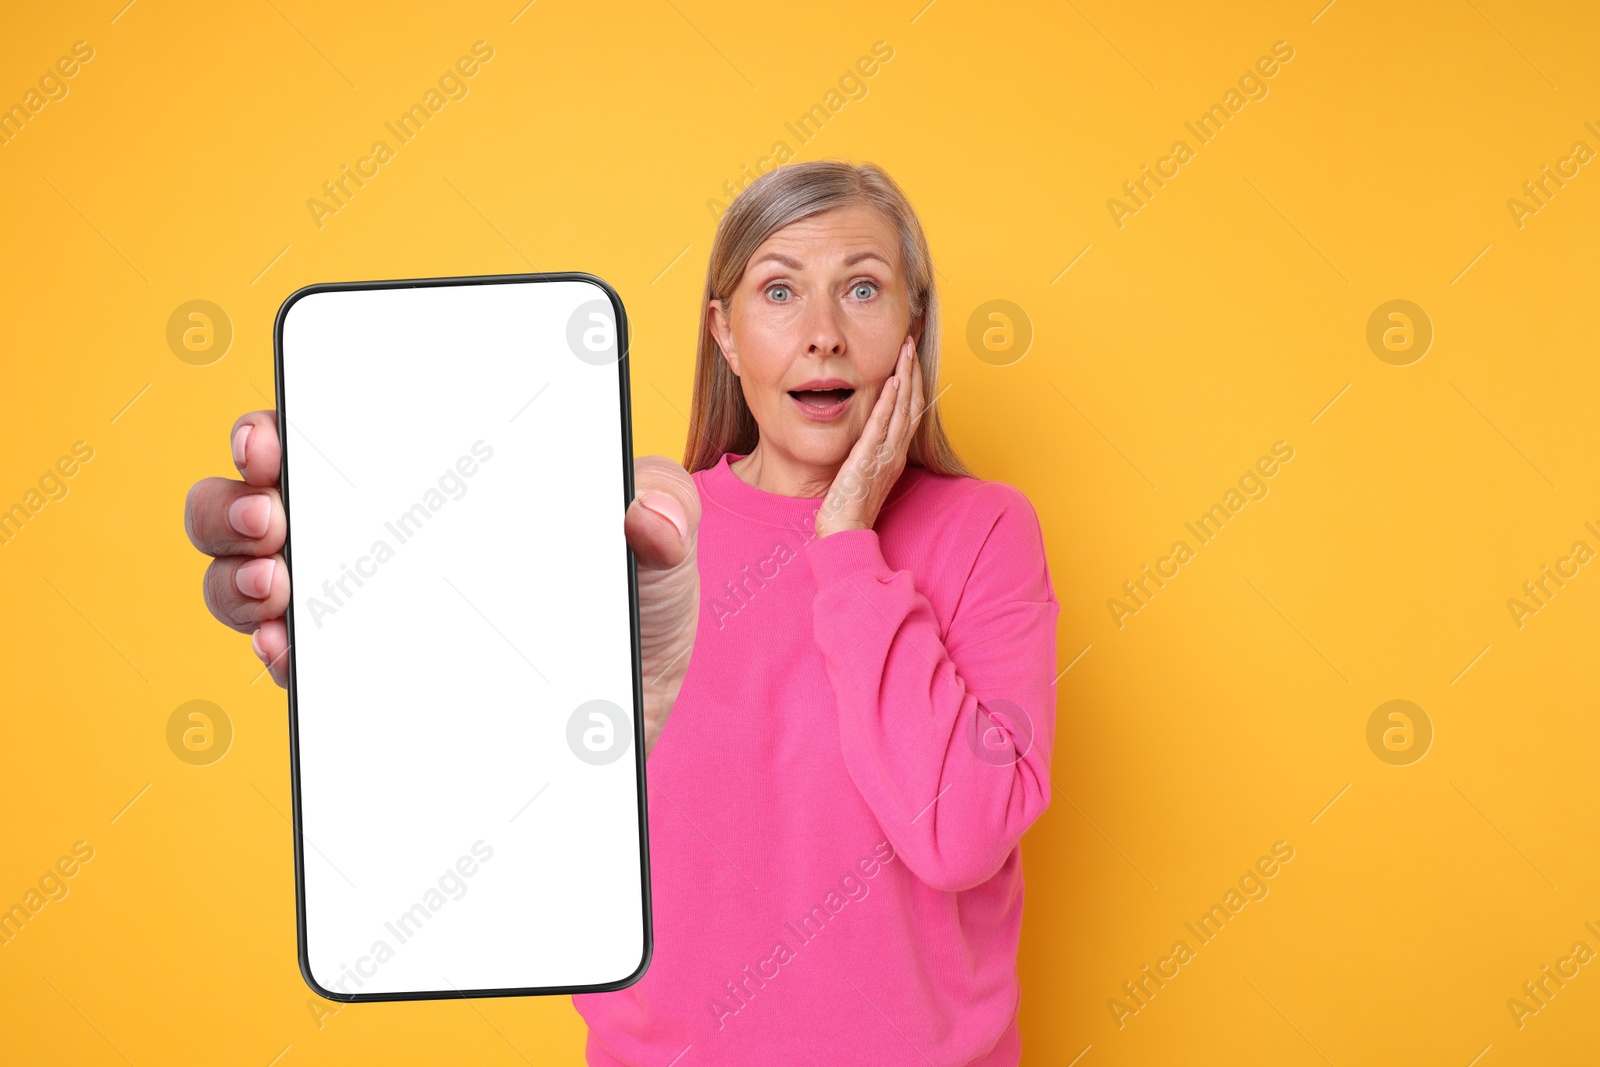 Image of Mature woman showing mobile phone with blank screen on golden background. Mockup for design